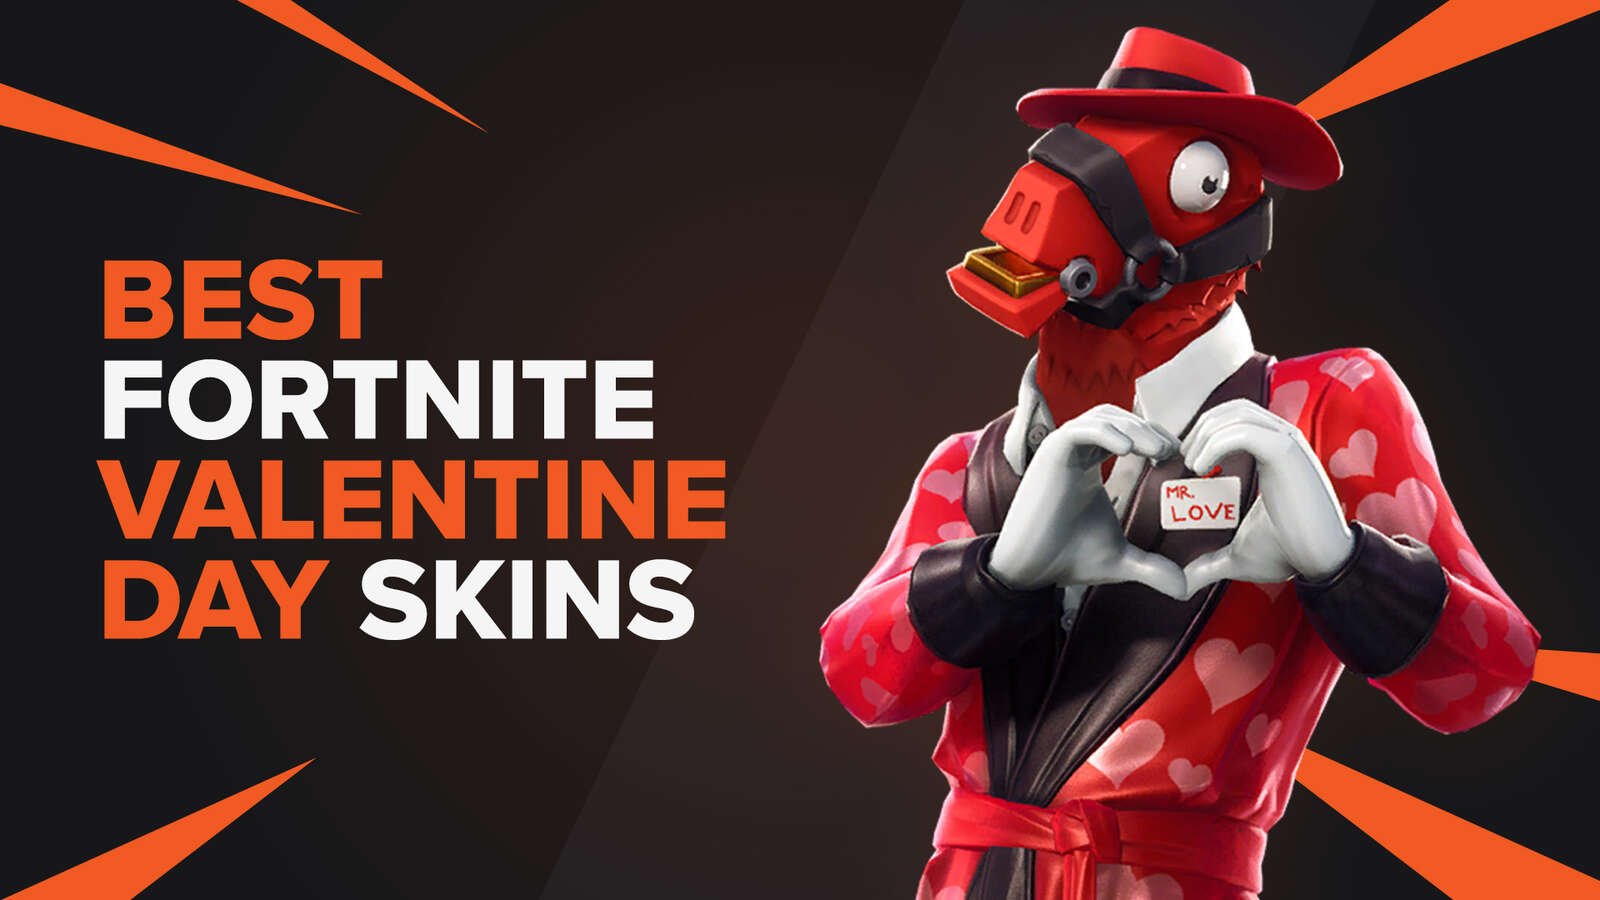 Fortnite Valentine Days Skins You'll fall in love with